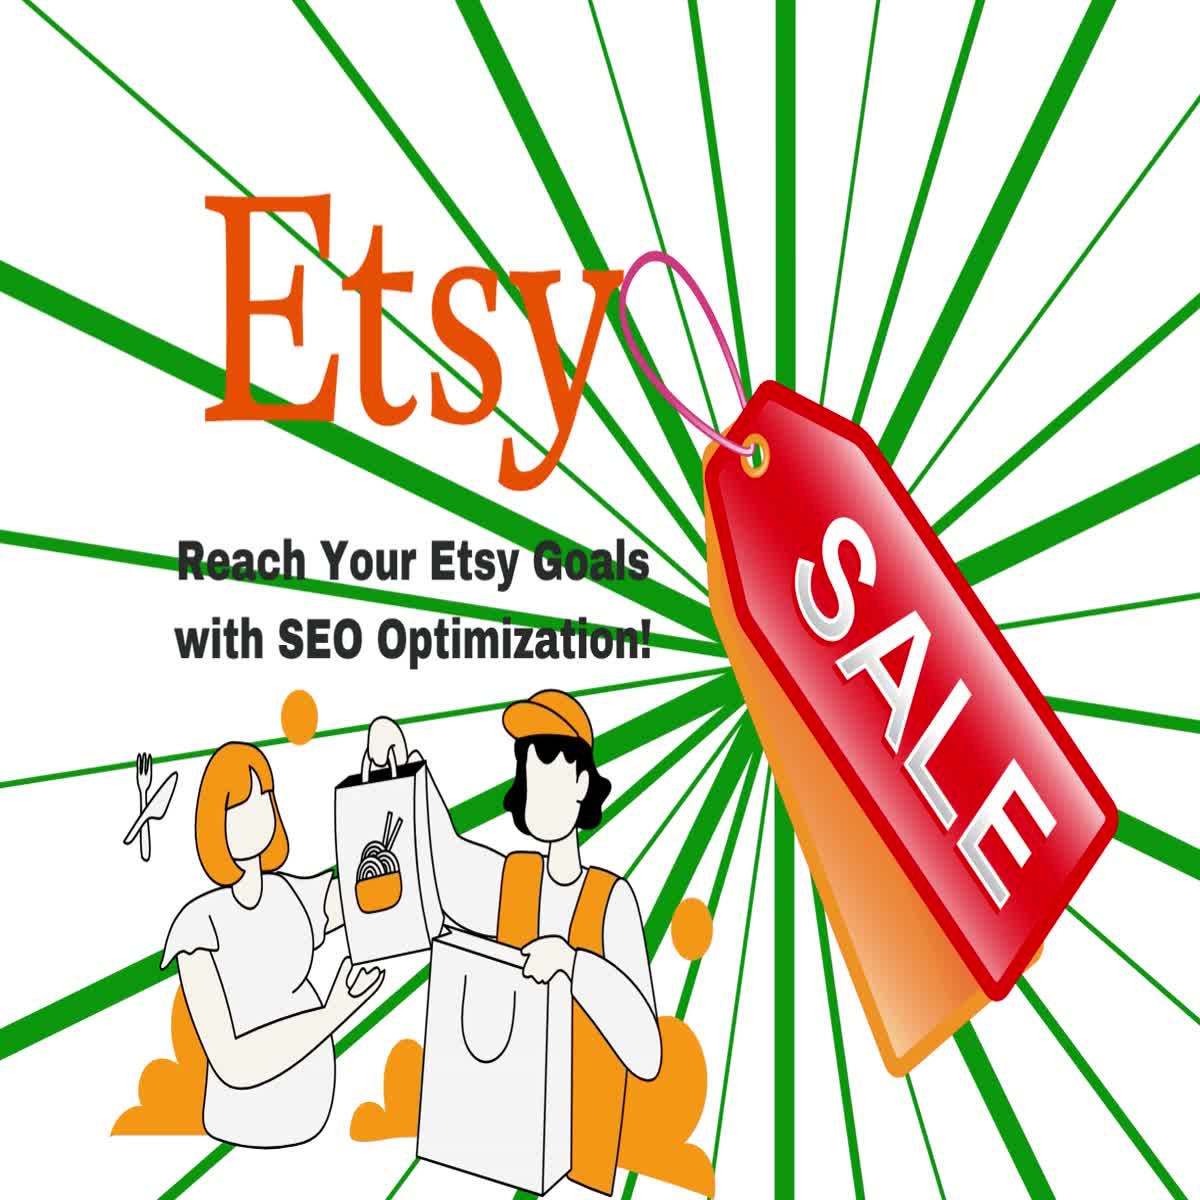 Get SEO Optimization Services for Your Etsy Store